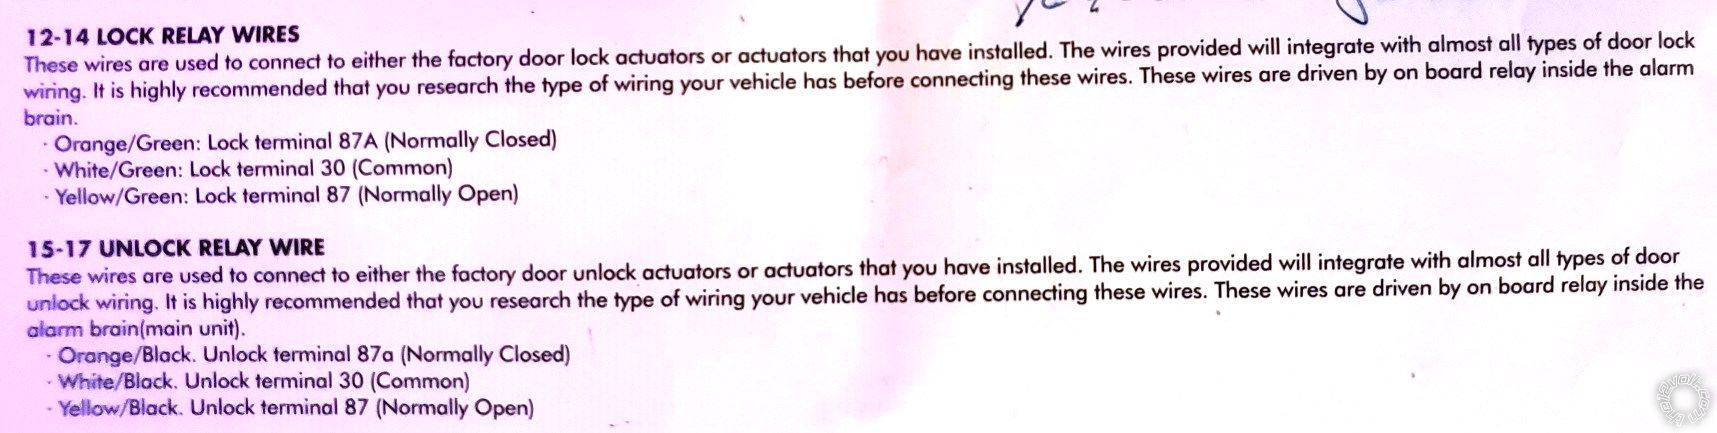 5 Wire Relay Issue, Keyless Entry/Alarm, 1997 Chevrolet Suburban -- posted image.